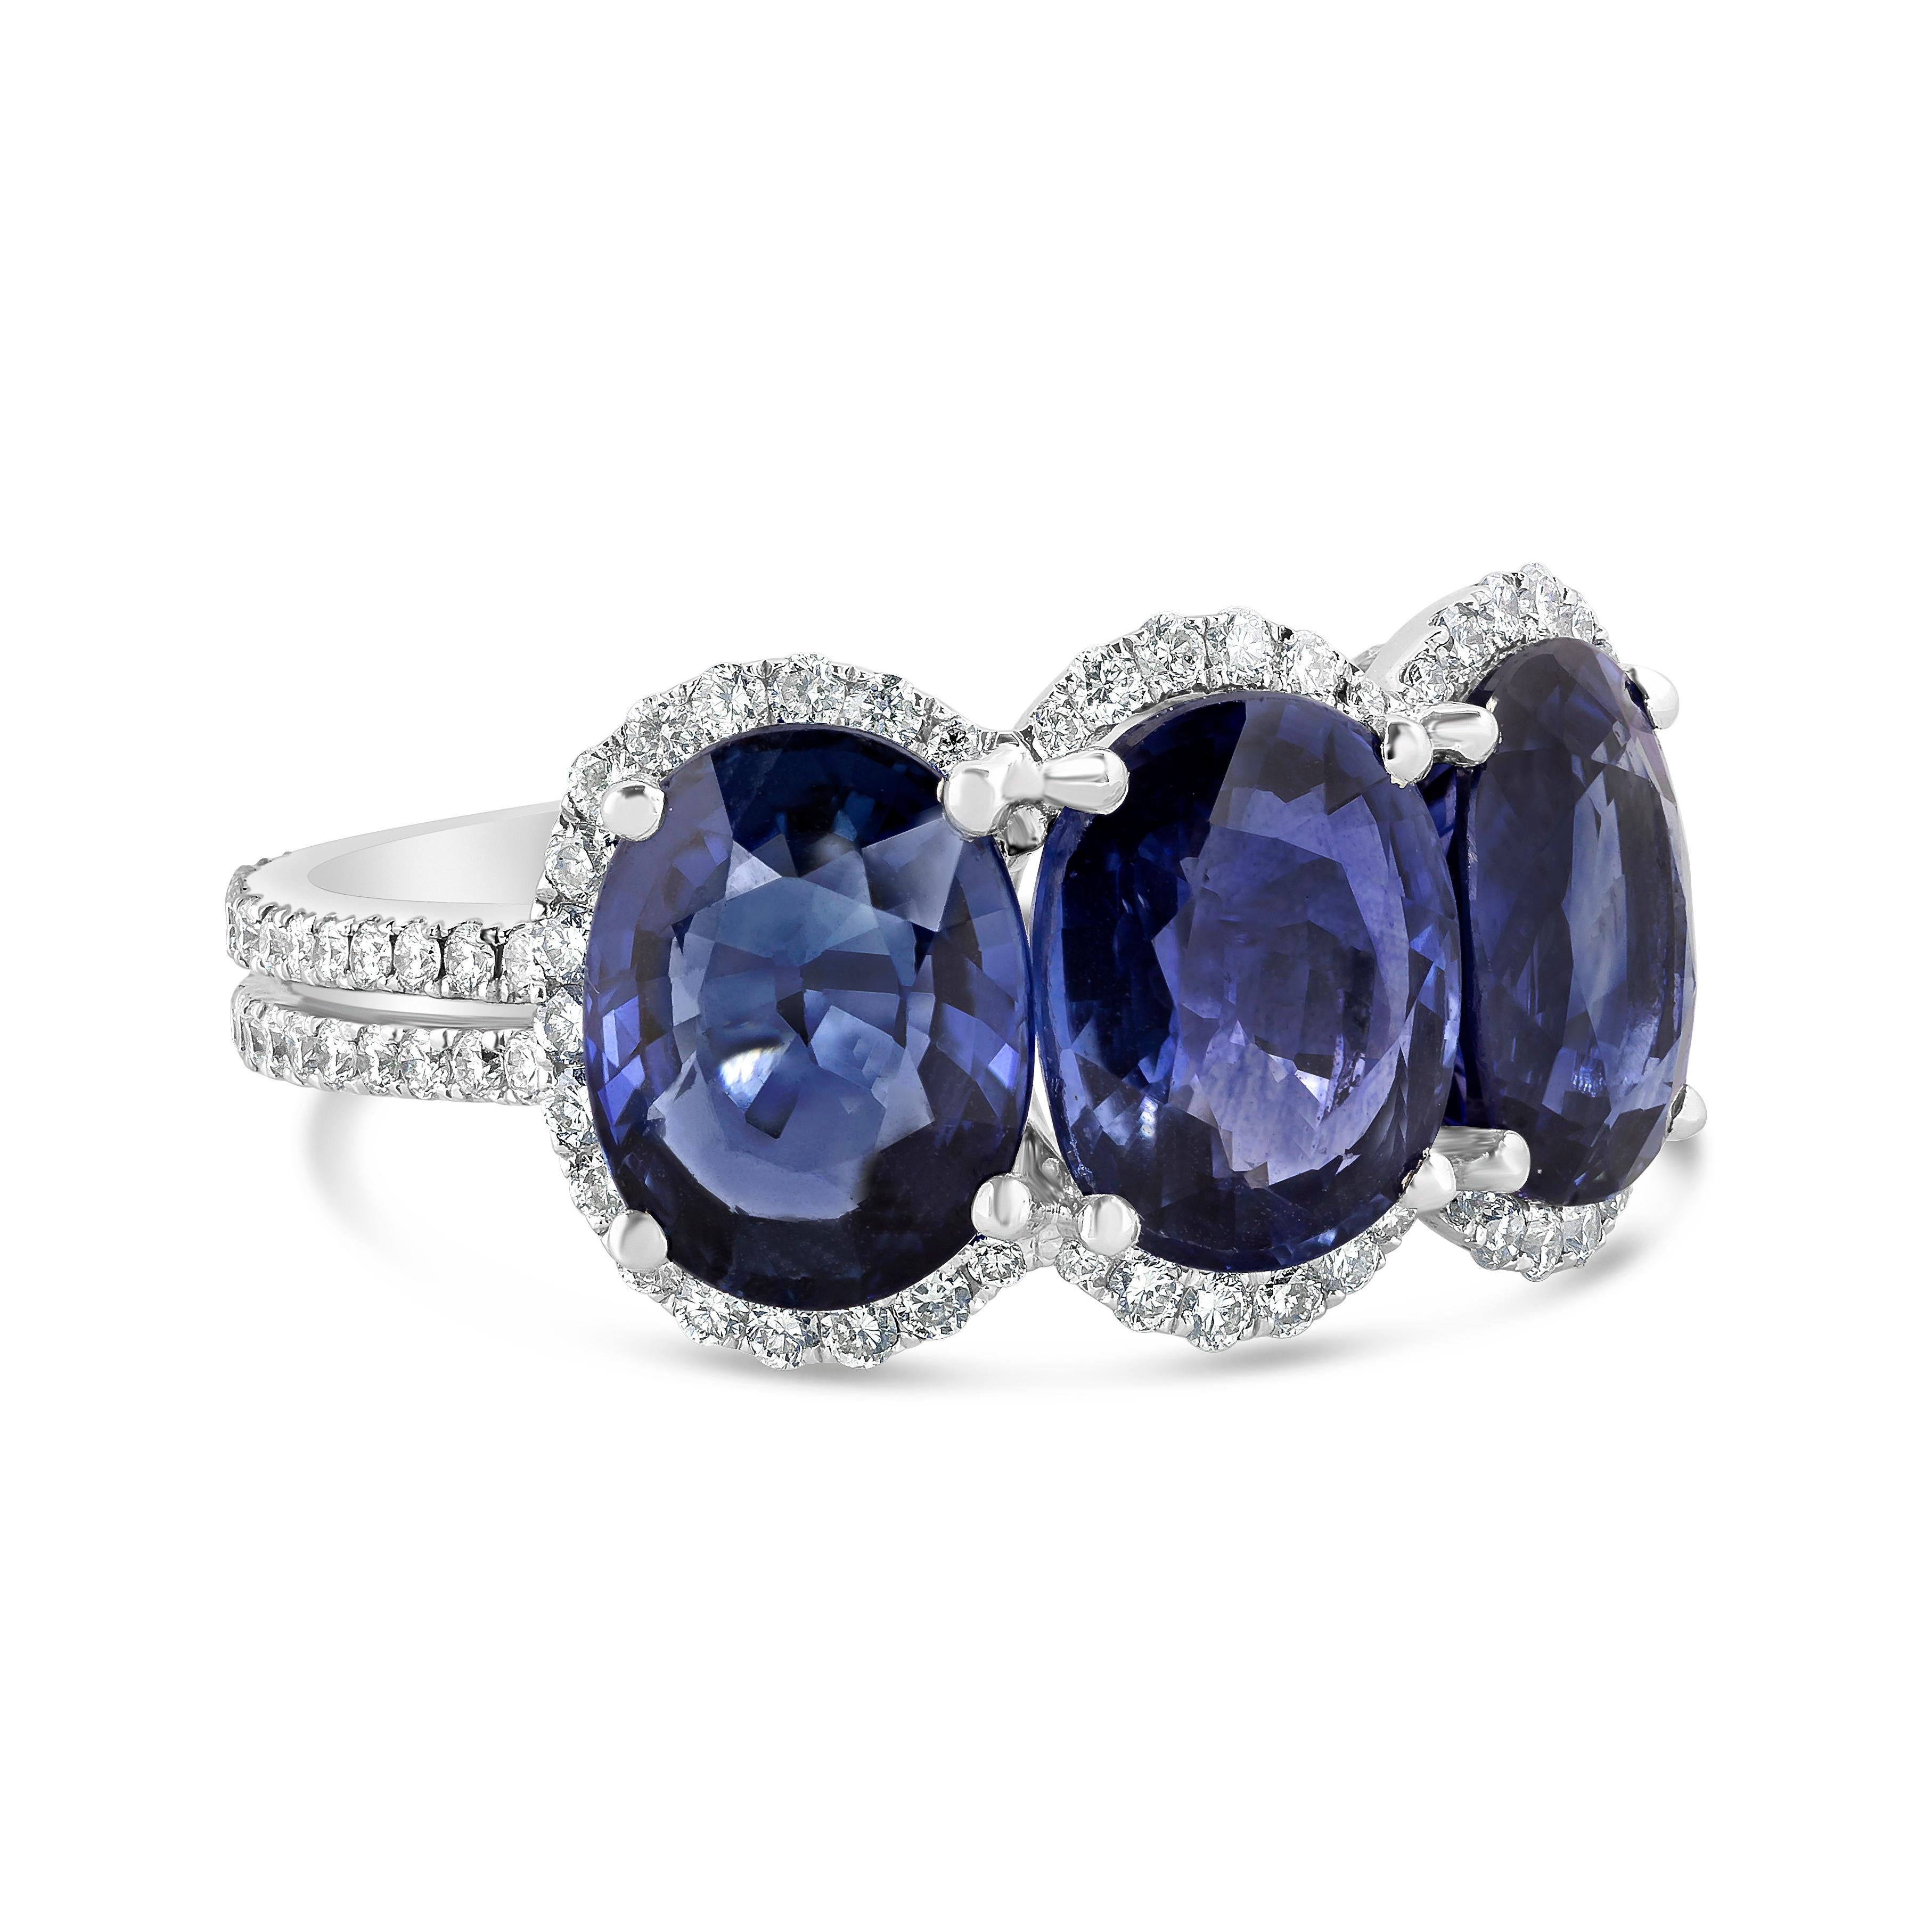 Features a three perfectly matched oval cut blue sapphires weighing 6.07 carats total. Each stone is set in four prong and surrounded by brilliant diamonds halo weighing 0.60 carats total. Set in an accented split shank composition, made in 18K